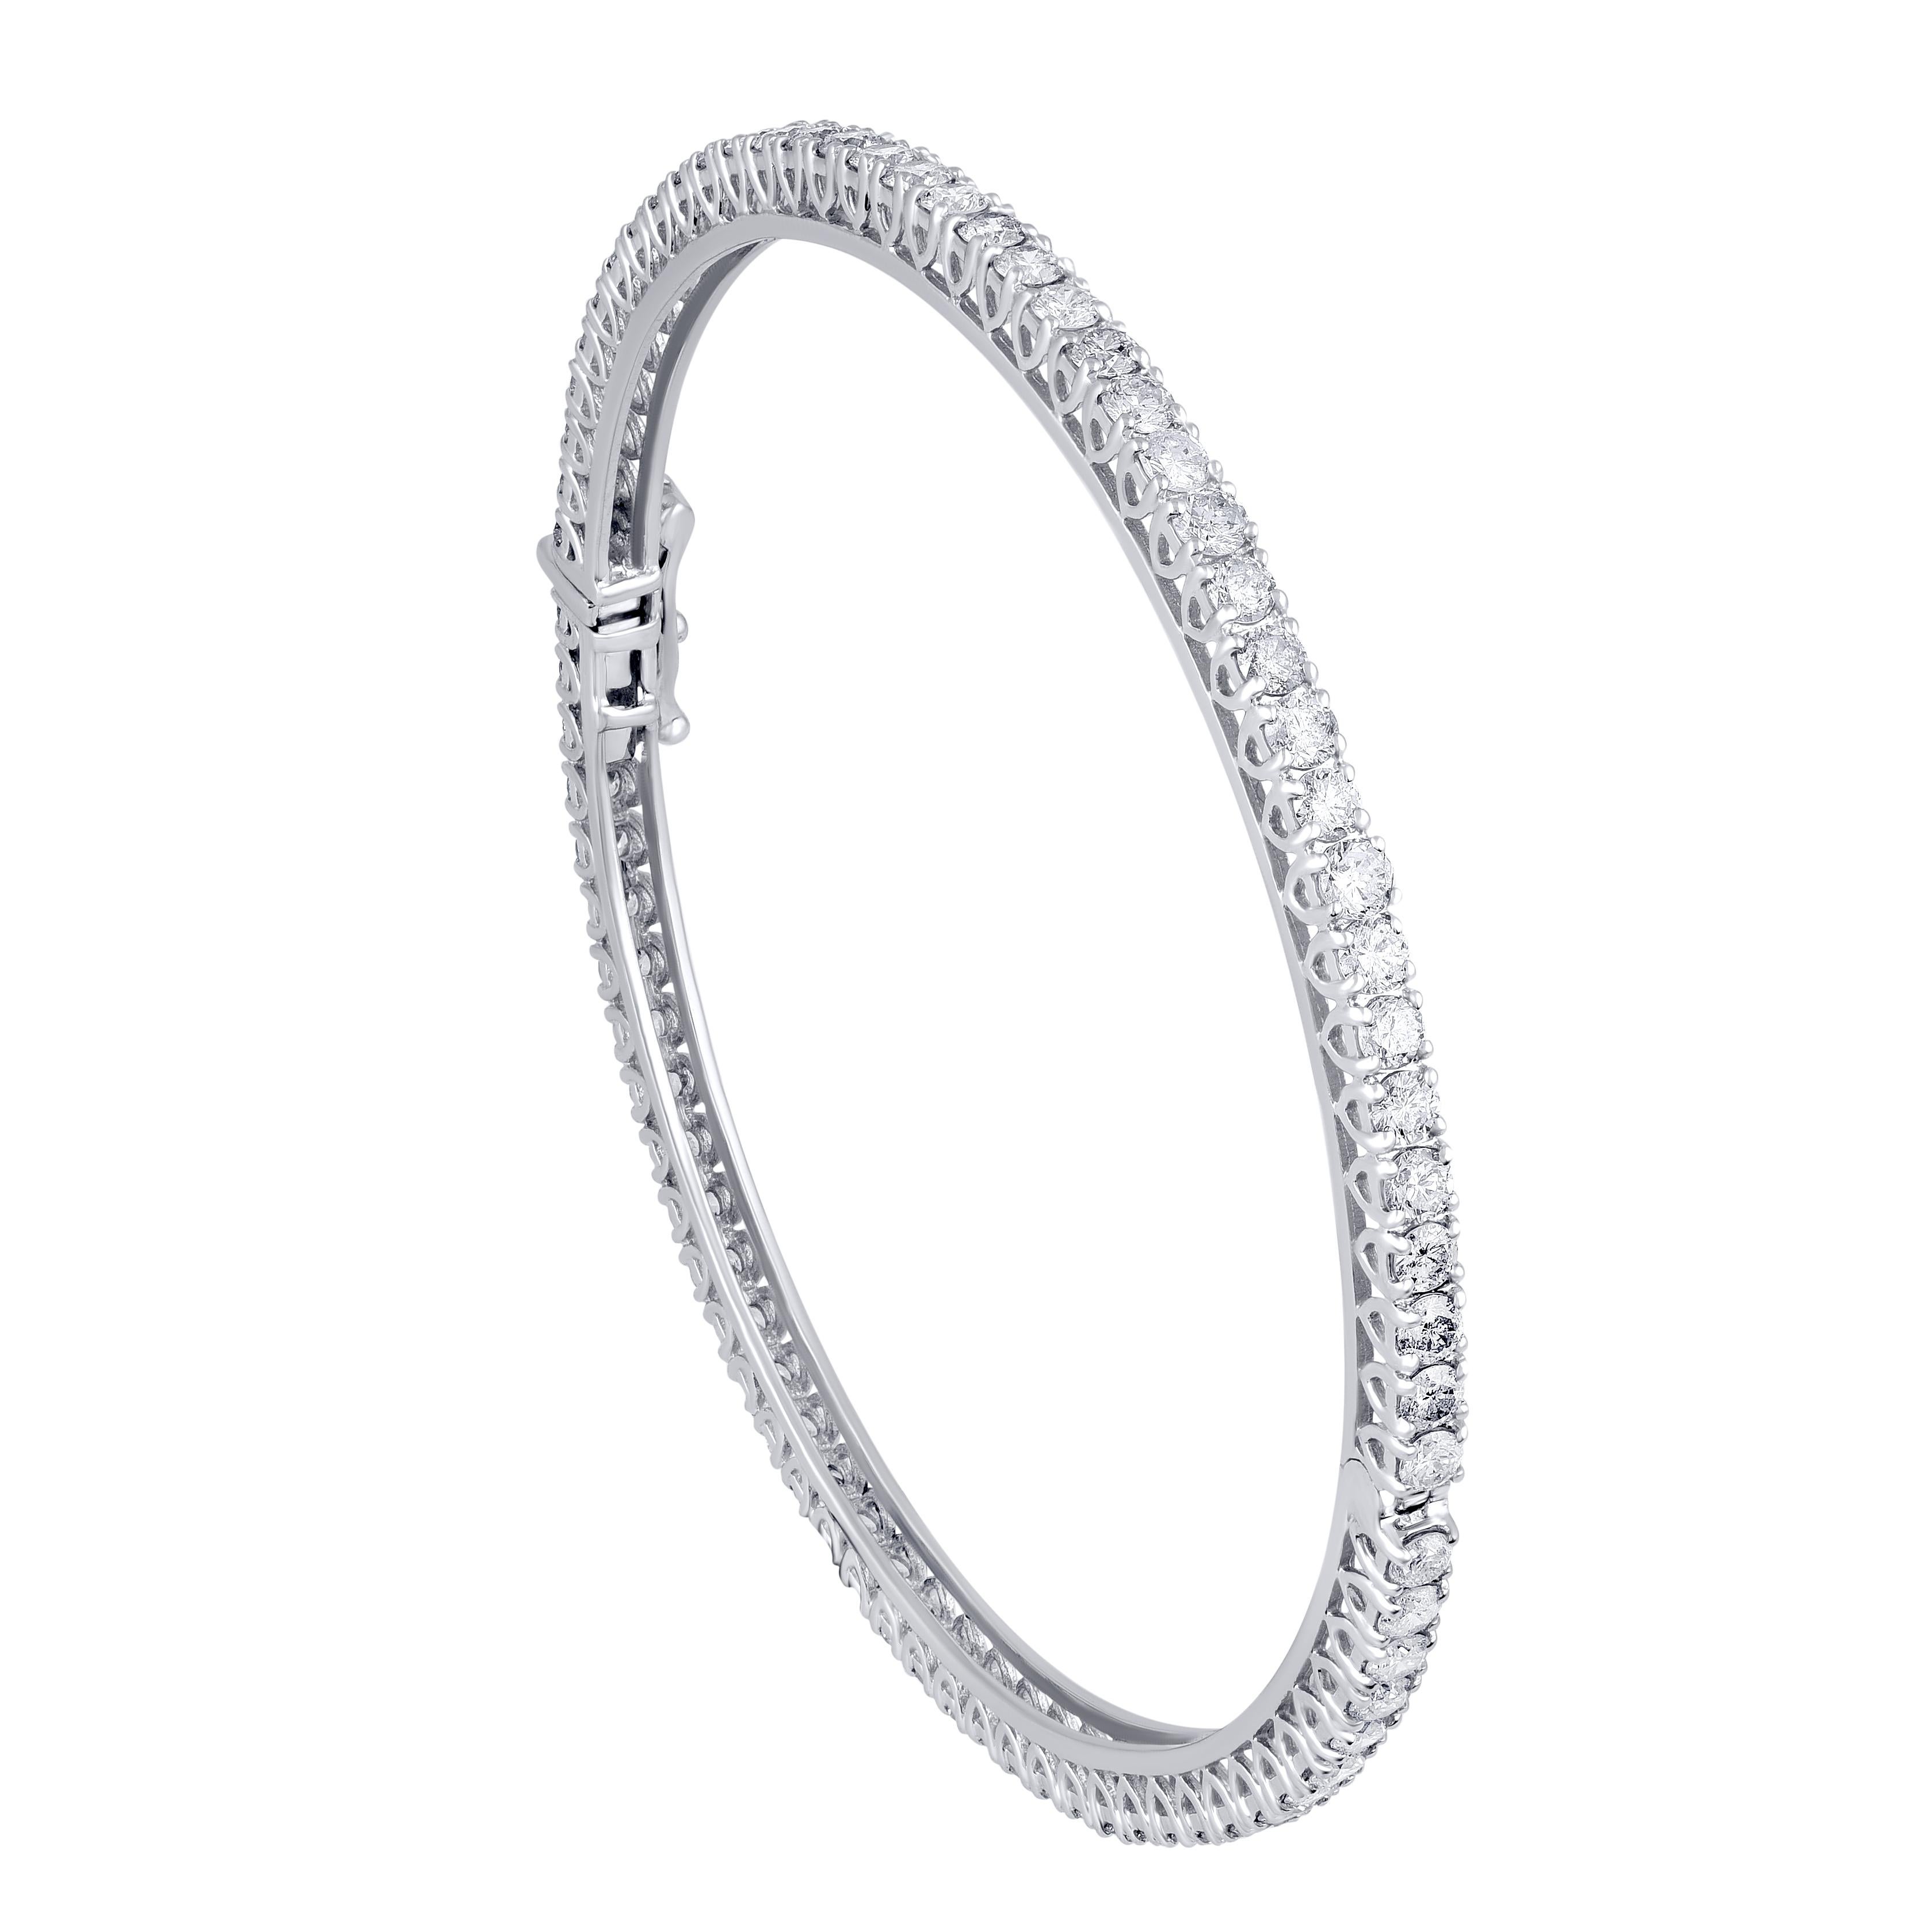 A shimmering piece of jewelry, this classic bangle is studded with 76 diamonds in prong setting and is crafted beautifully in 18 KT gold. Diamond details H-I Color, I1-I2 Clarity. This piece comes along with IGI certificate of authentication. Will